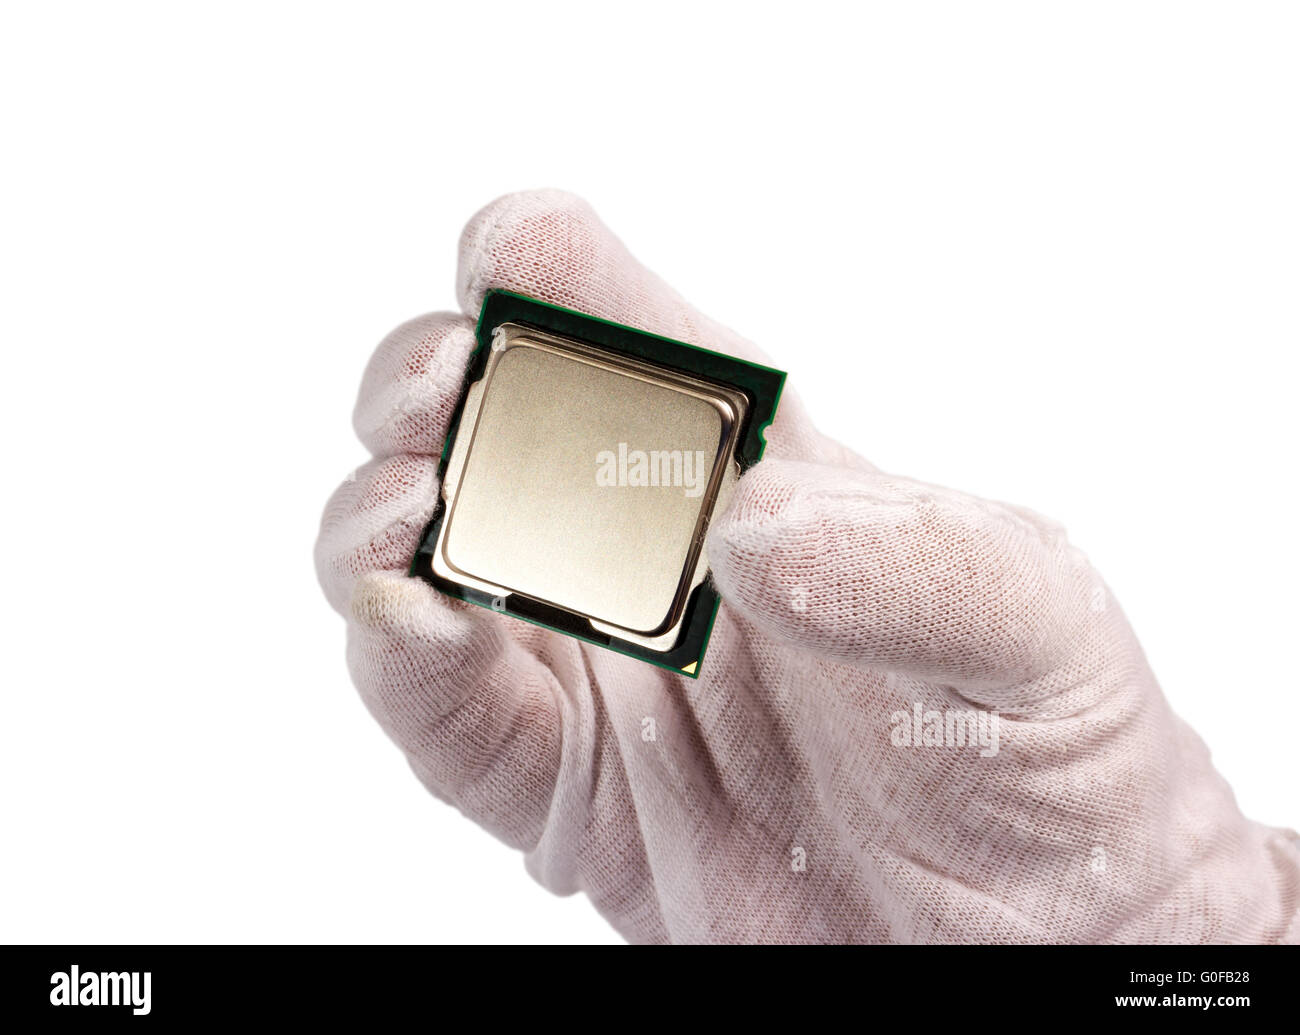 Computer processor from the top side in hand Stock Photo